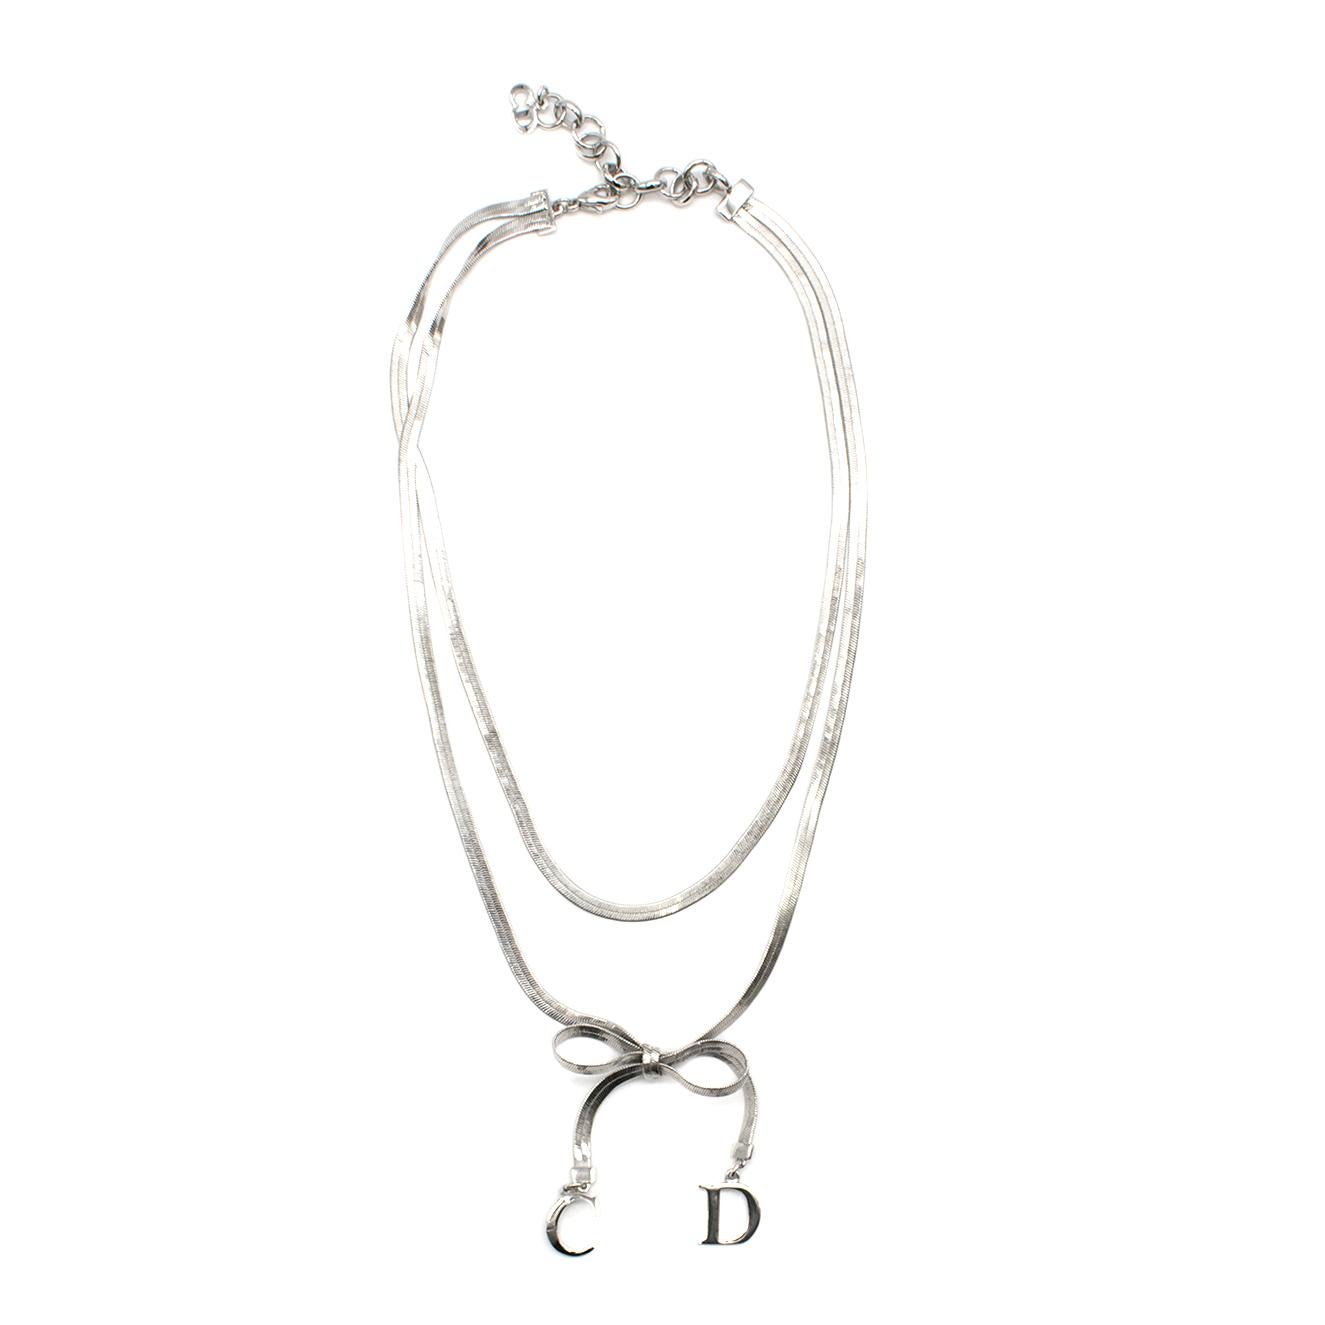 Christian Dior Silver Tone Double Chain Charm Necklace

- silver tone charm necklace 
- double chain 
- lobster claw fastening 
- bow detail to the bottom embellished with C & D

Please note, these items are pre-owned and may show some signs of